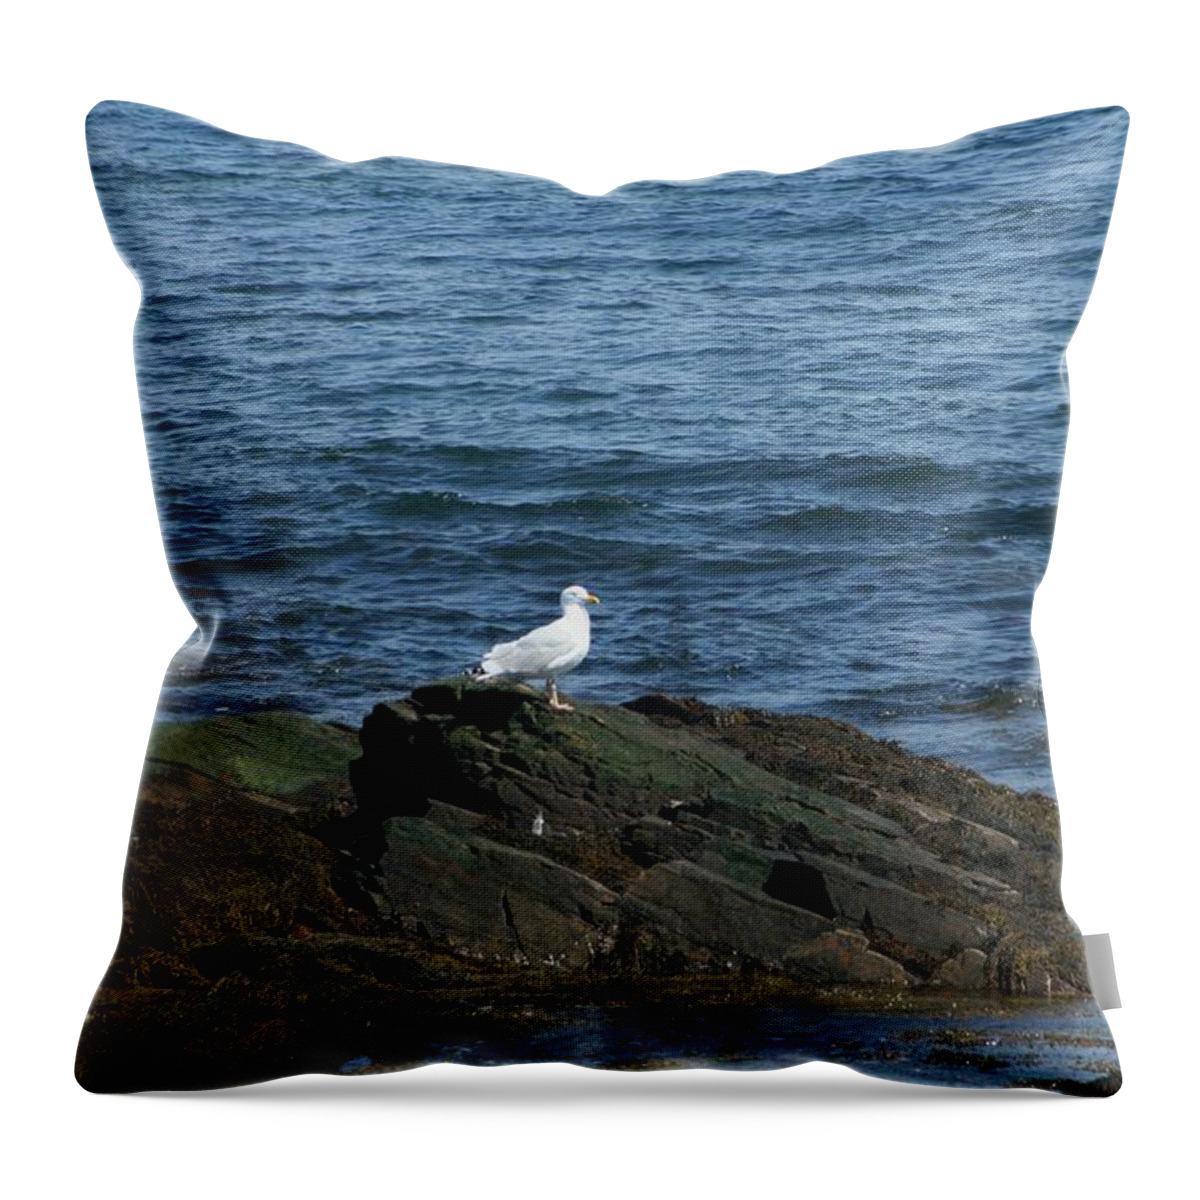 Photography Throw Pillow featuring the digital art Seagull on the Rocks by Barbara S Nickerson